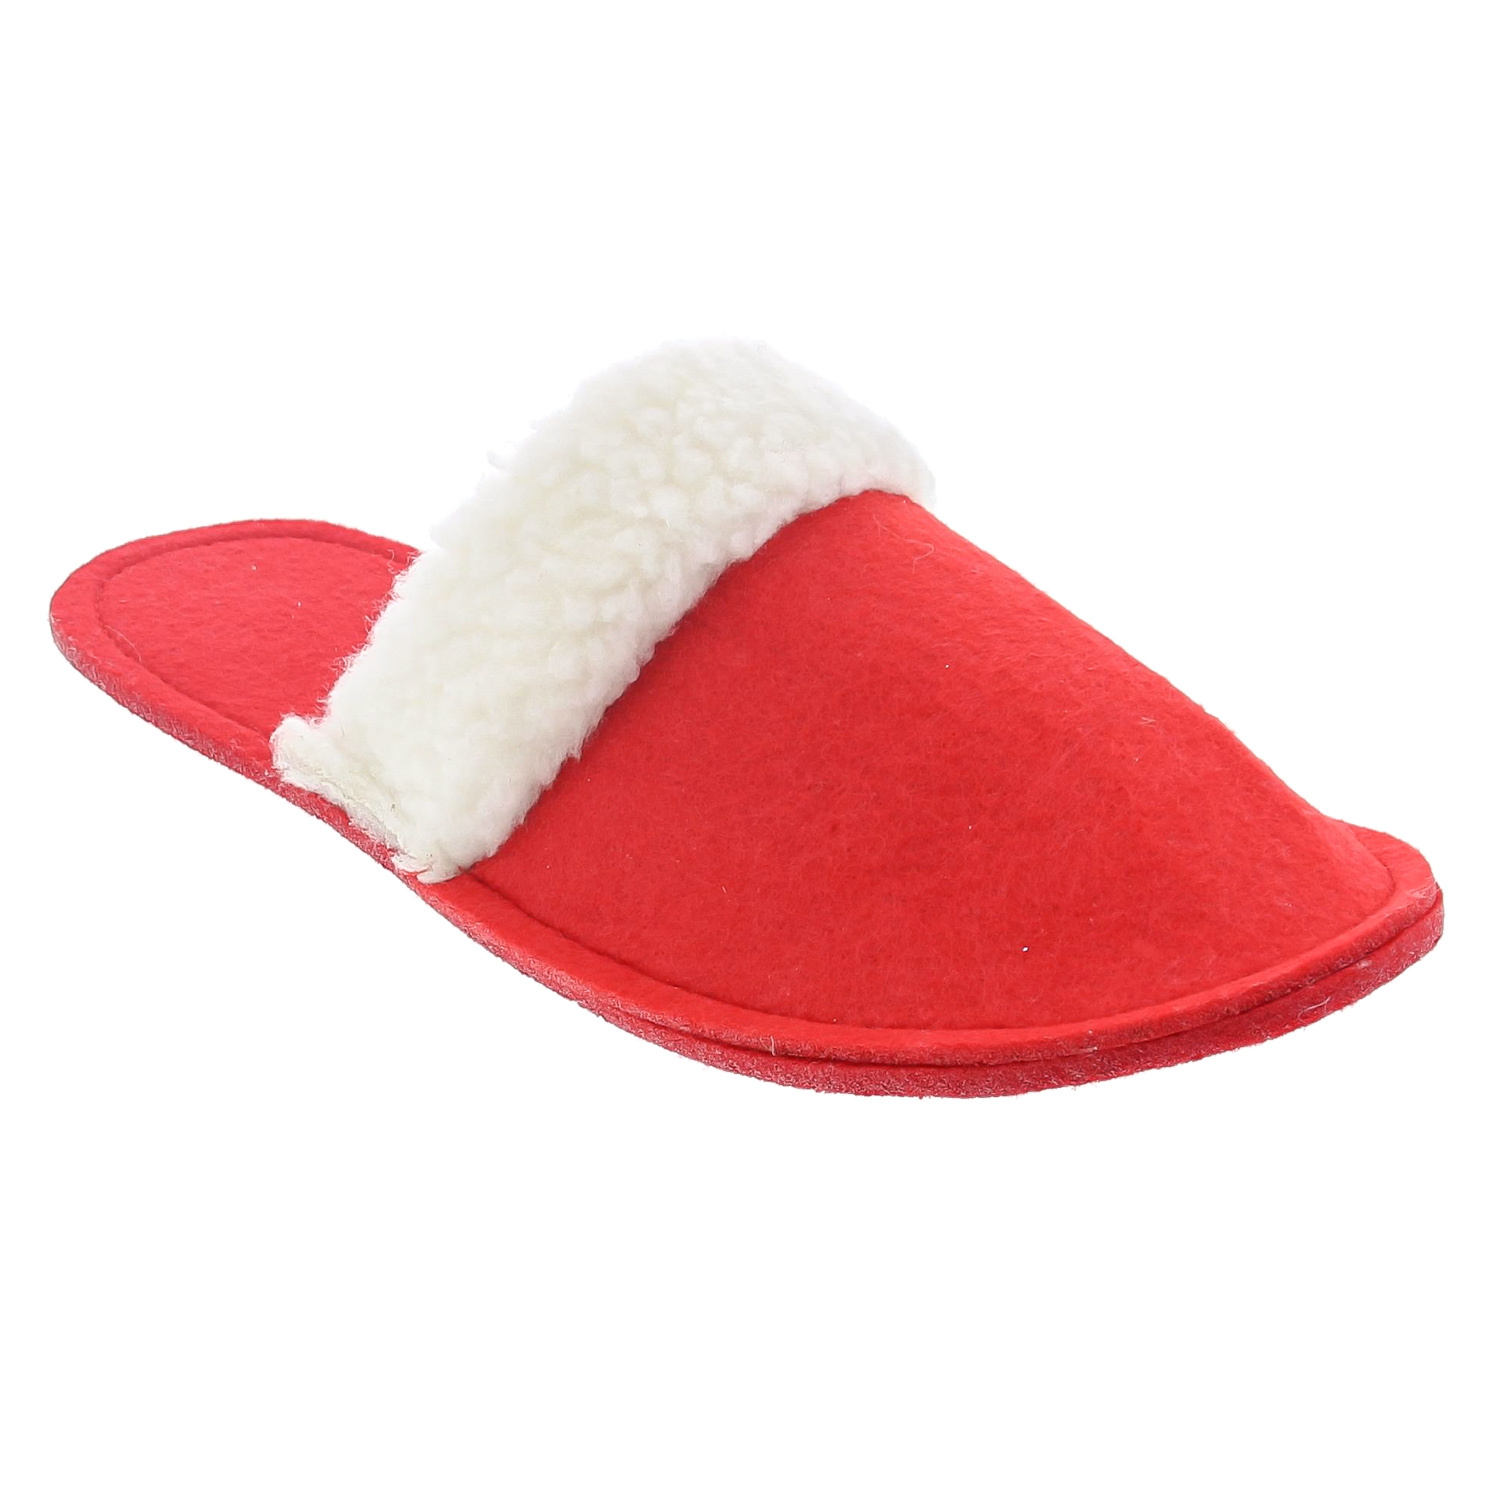 Santa's slippers - 280*110*70 mm - 12 pieces